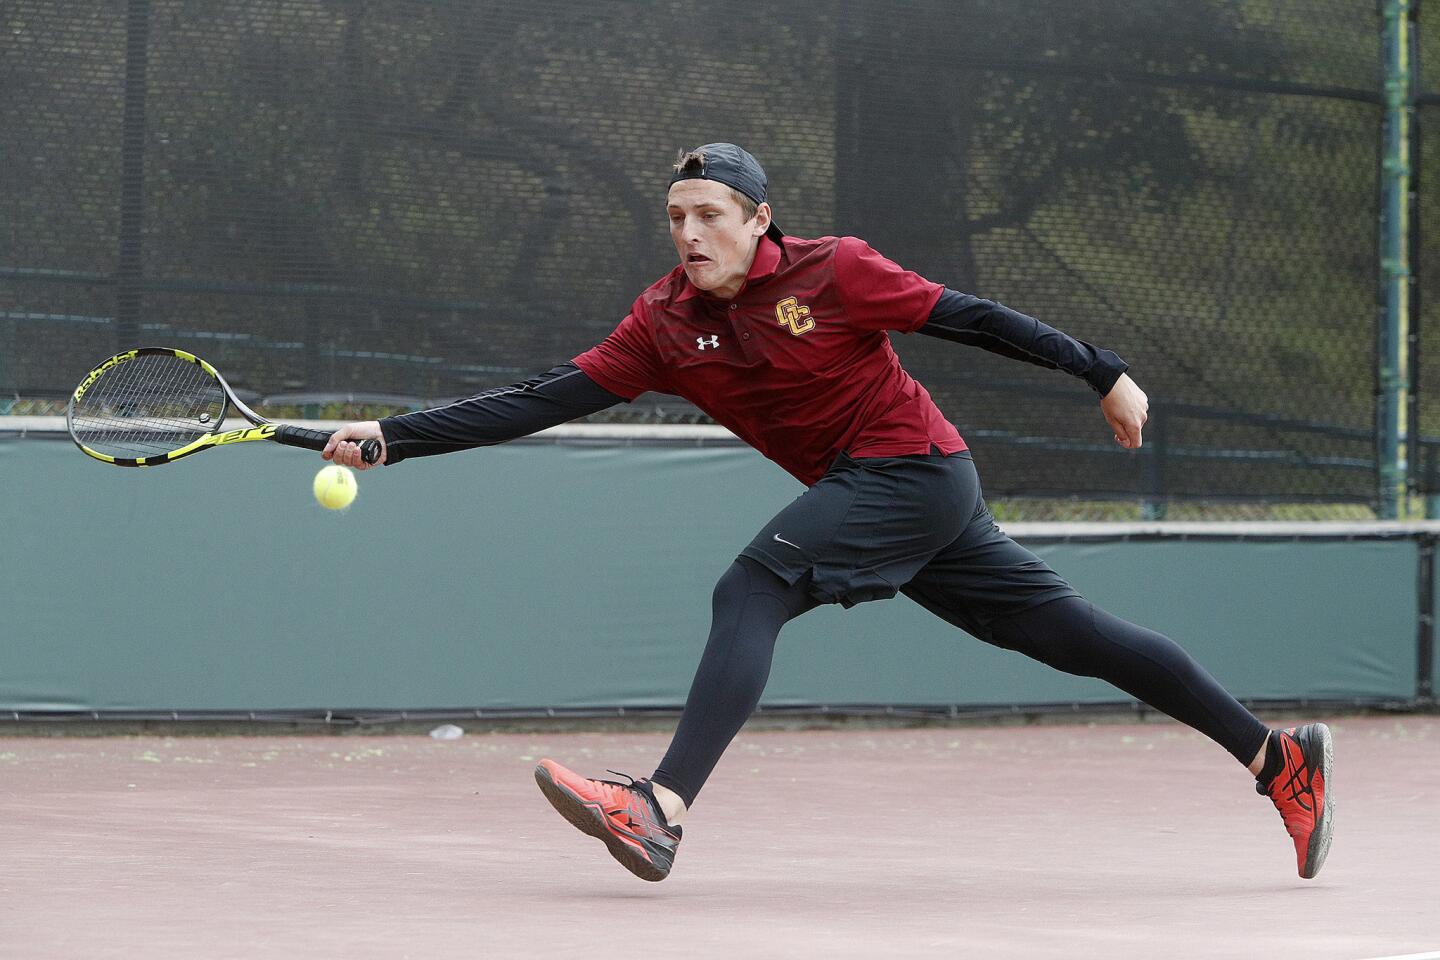 GCCâ€™s Nicholas Pupiec chases a wide shot to return it in a Western State Conference men's tennis match against Santa Barbara City College at Glendale Community College on Tuesday, March 19, 2019.